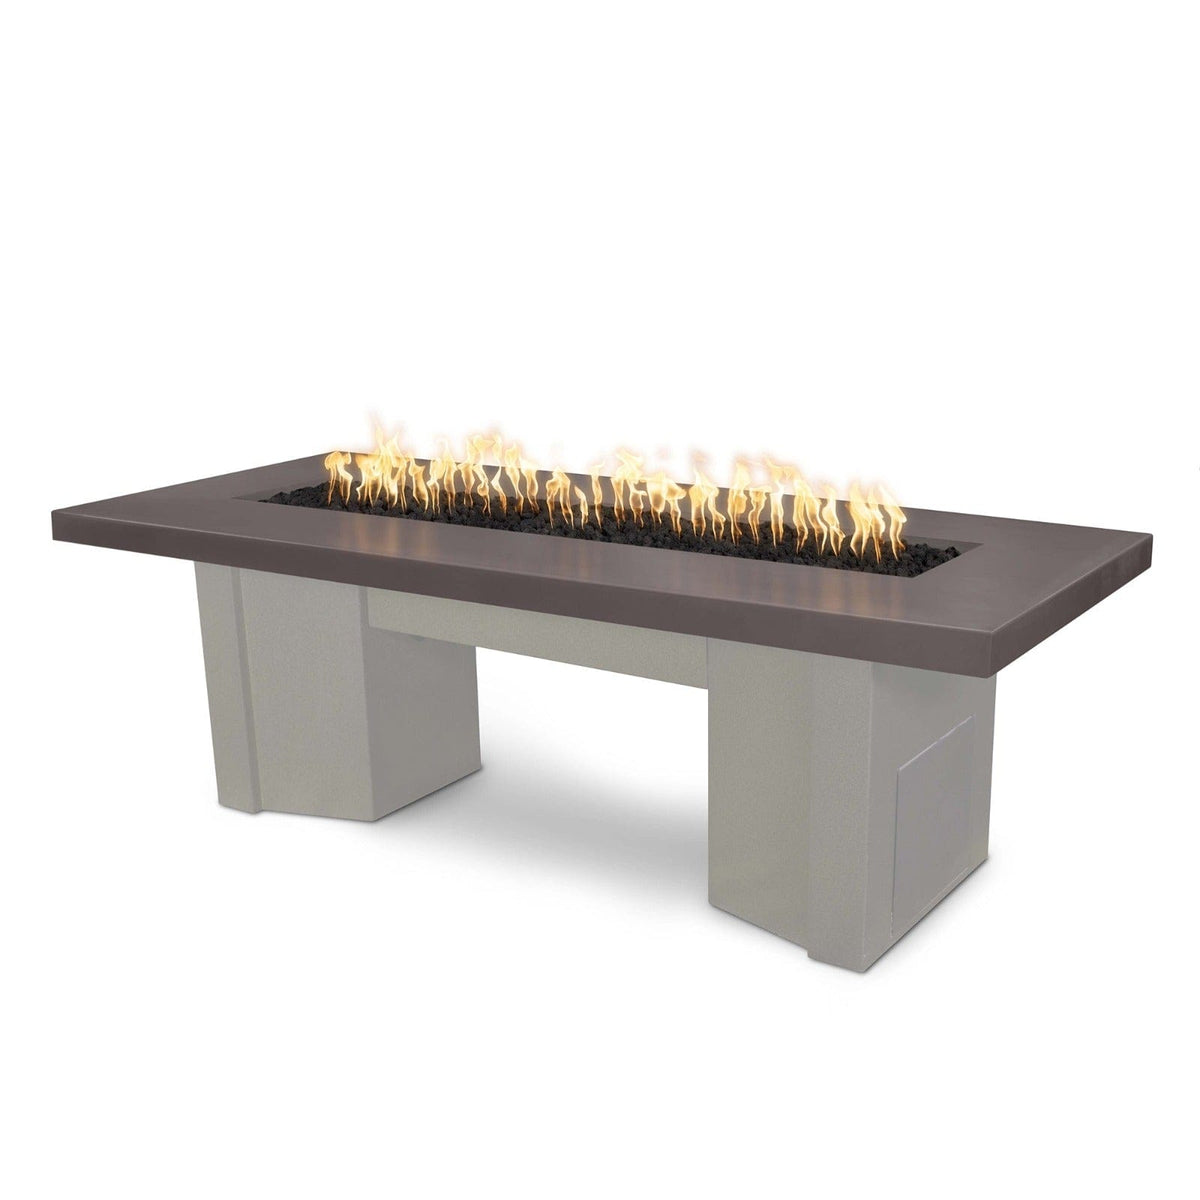 The Outdoor Plus Fire Features Chestnut (-CST) / Pewter Powder Coated Steel (-PEW) The Outdoor Plus 60&quot; Alameda Fire Table Smooth Concrete in Liquid Propane - Match Lit with Flame Sense System / OPT-ALMGFRC60FSML-LP